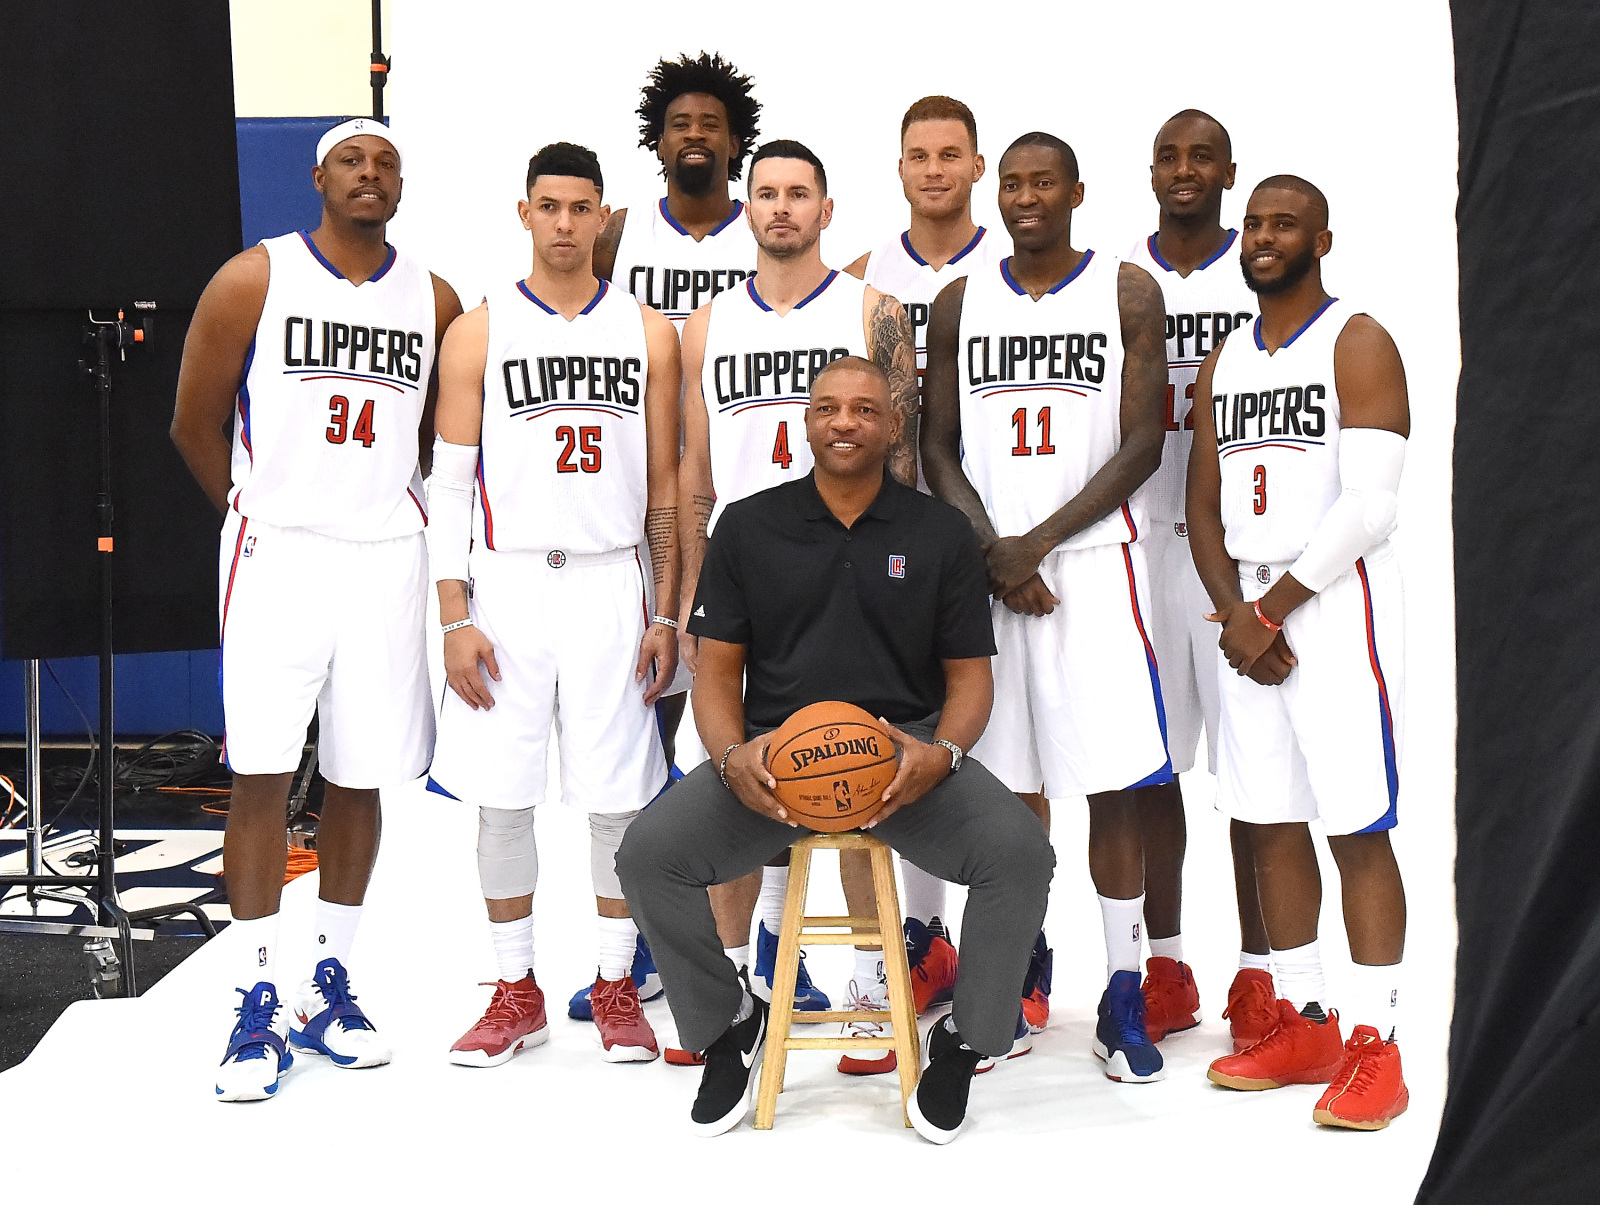 The Best NBA To Never Win A Championship: The 2013-14 LA Clippers